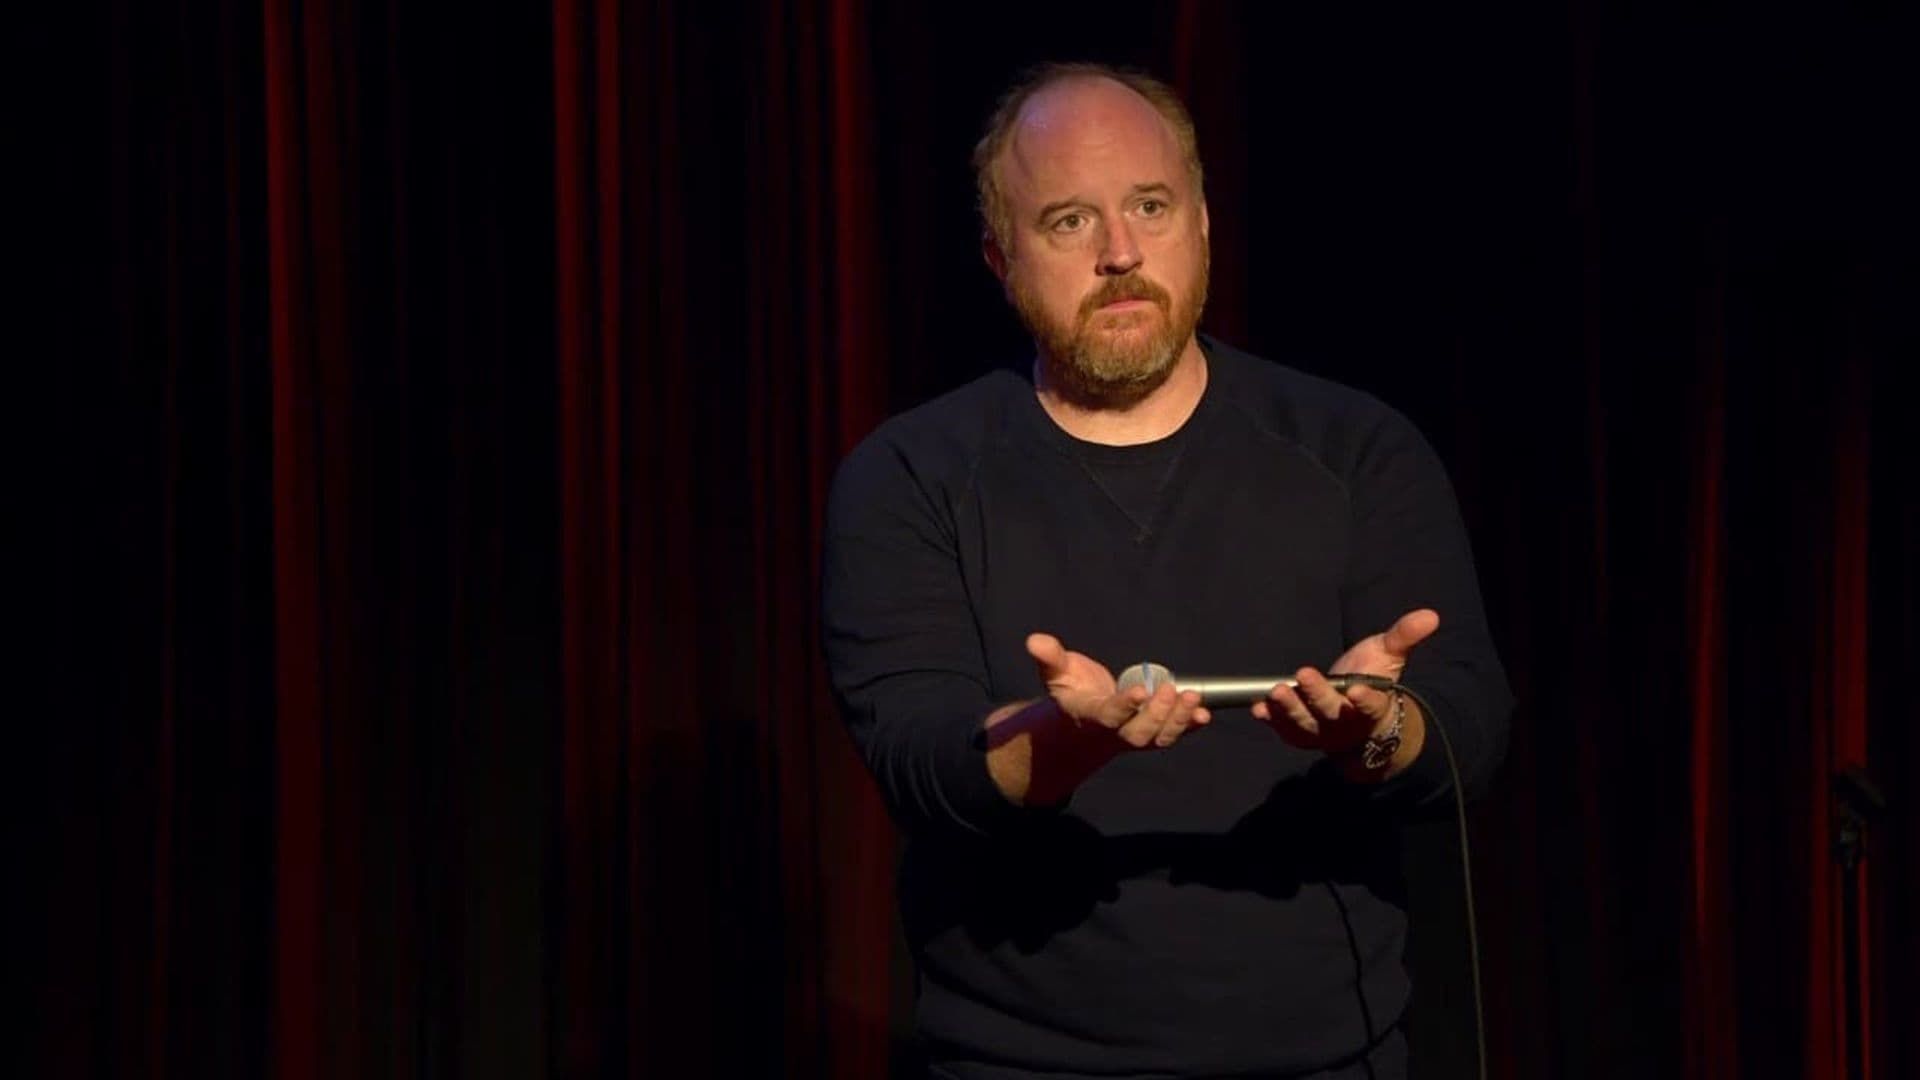 Louis C.K.: Live at the Comedy Store background